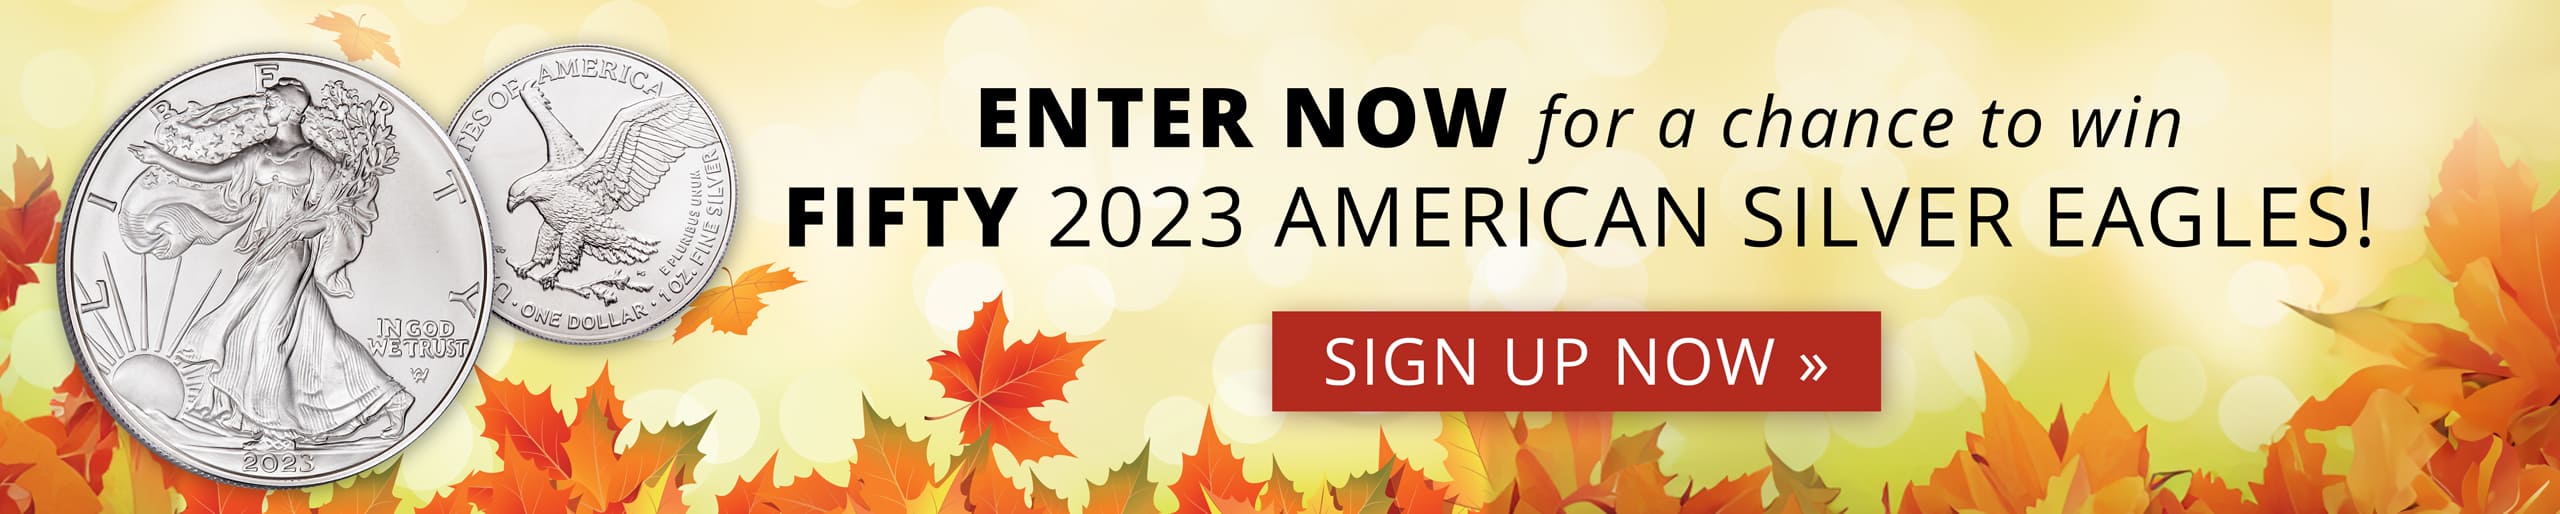 ENTER NOW for a chance to win FIFTY 2023 American Silver Eagles! - Sign Up Now